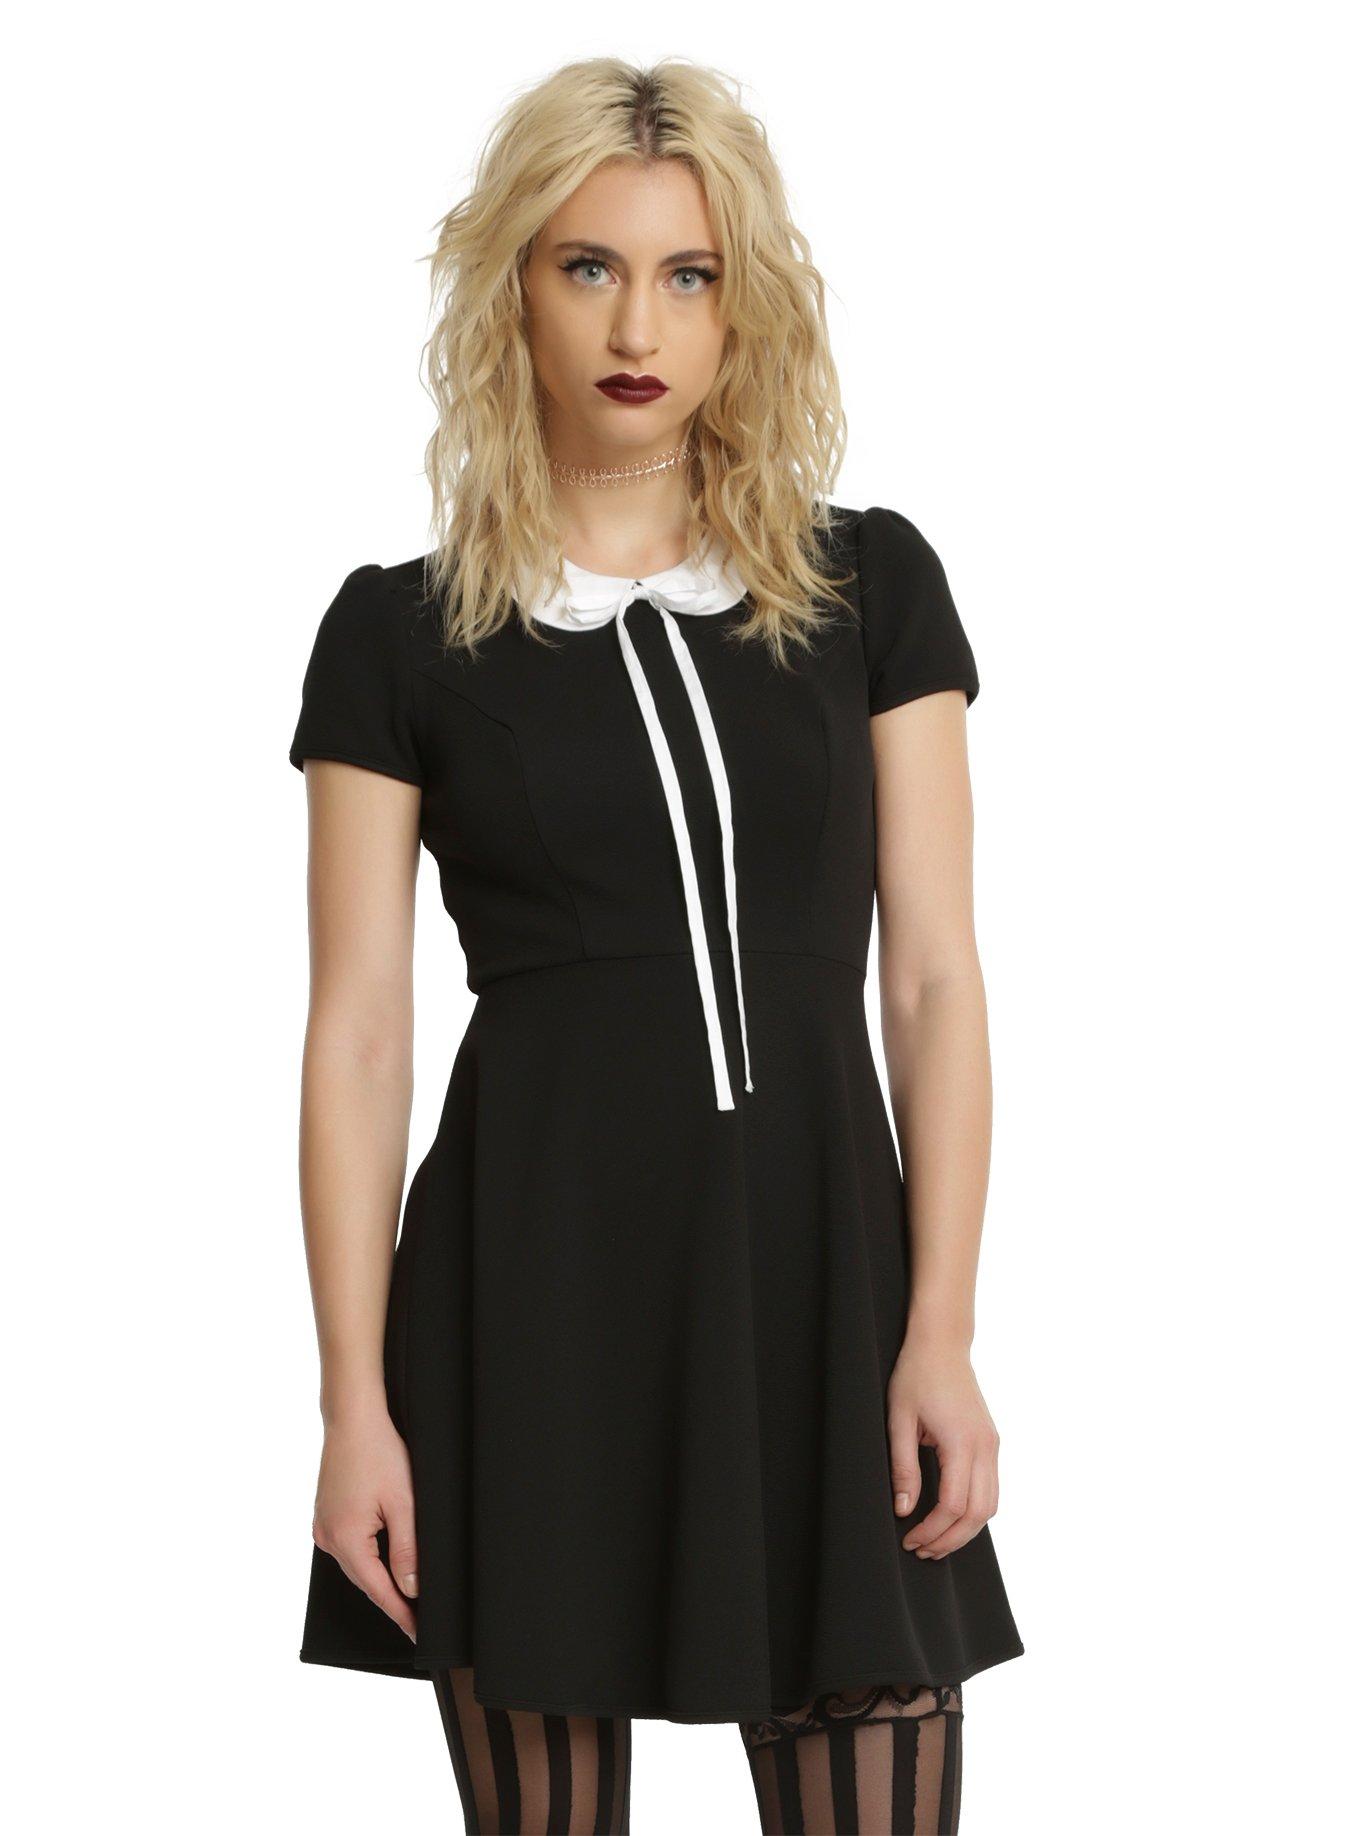 Black & White Collar Long Bow Fit & Flare Dress, GREEN, hi-res